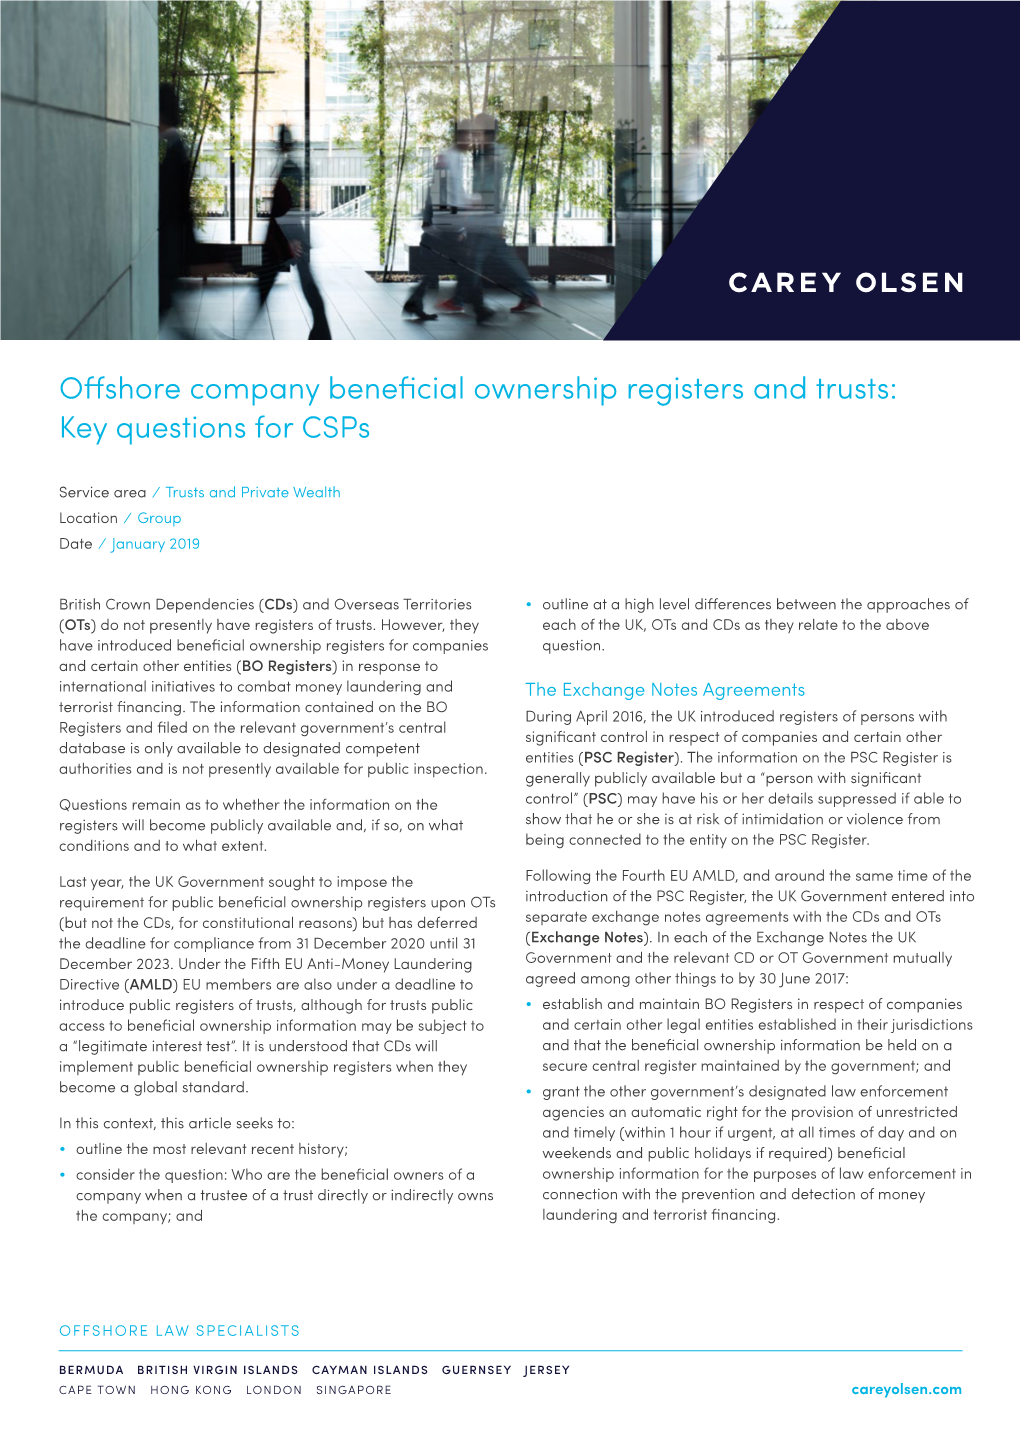 Offshore Company Beneficial Ownership Registers and Trusts: Key Questions for Csps